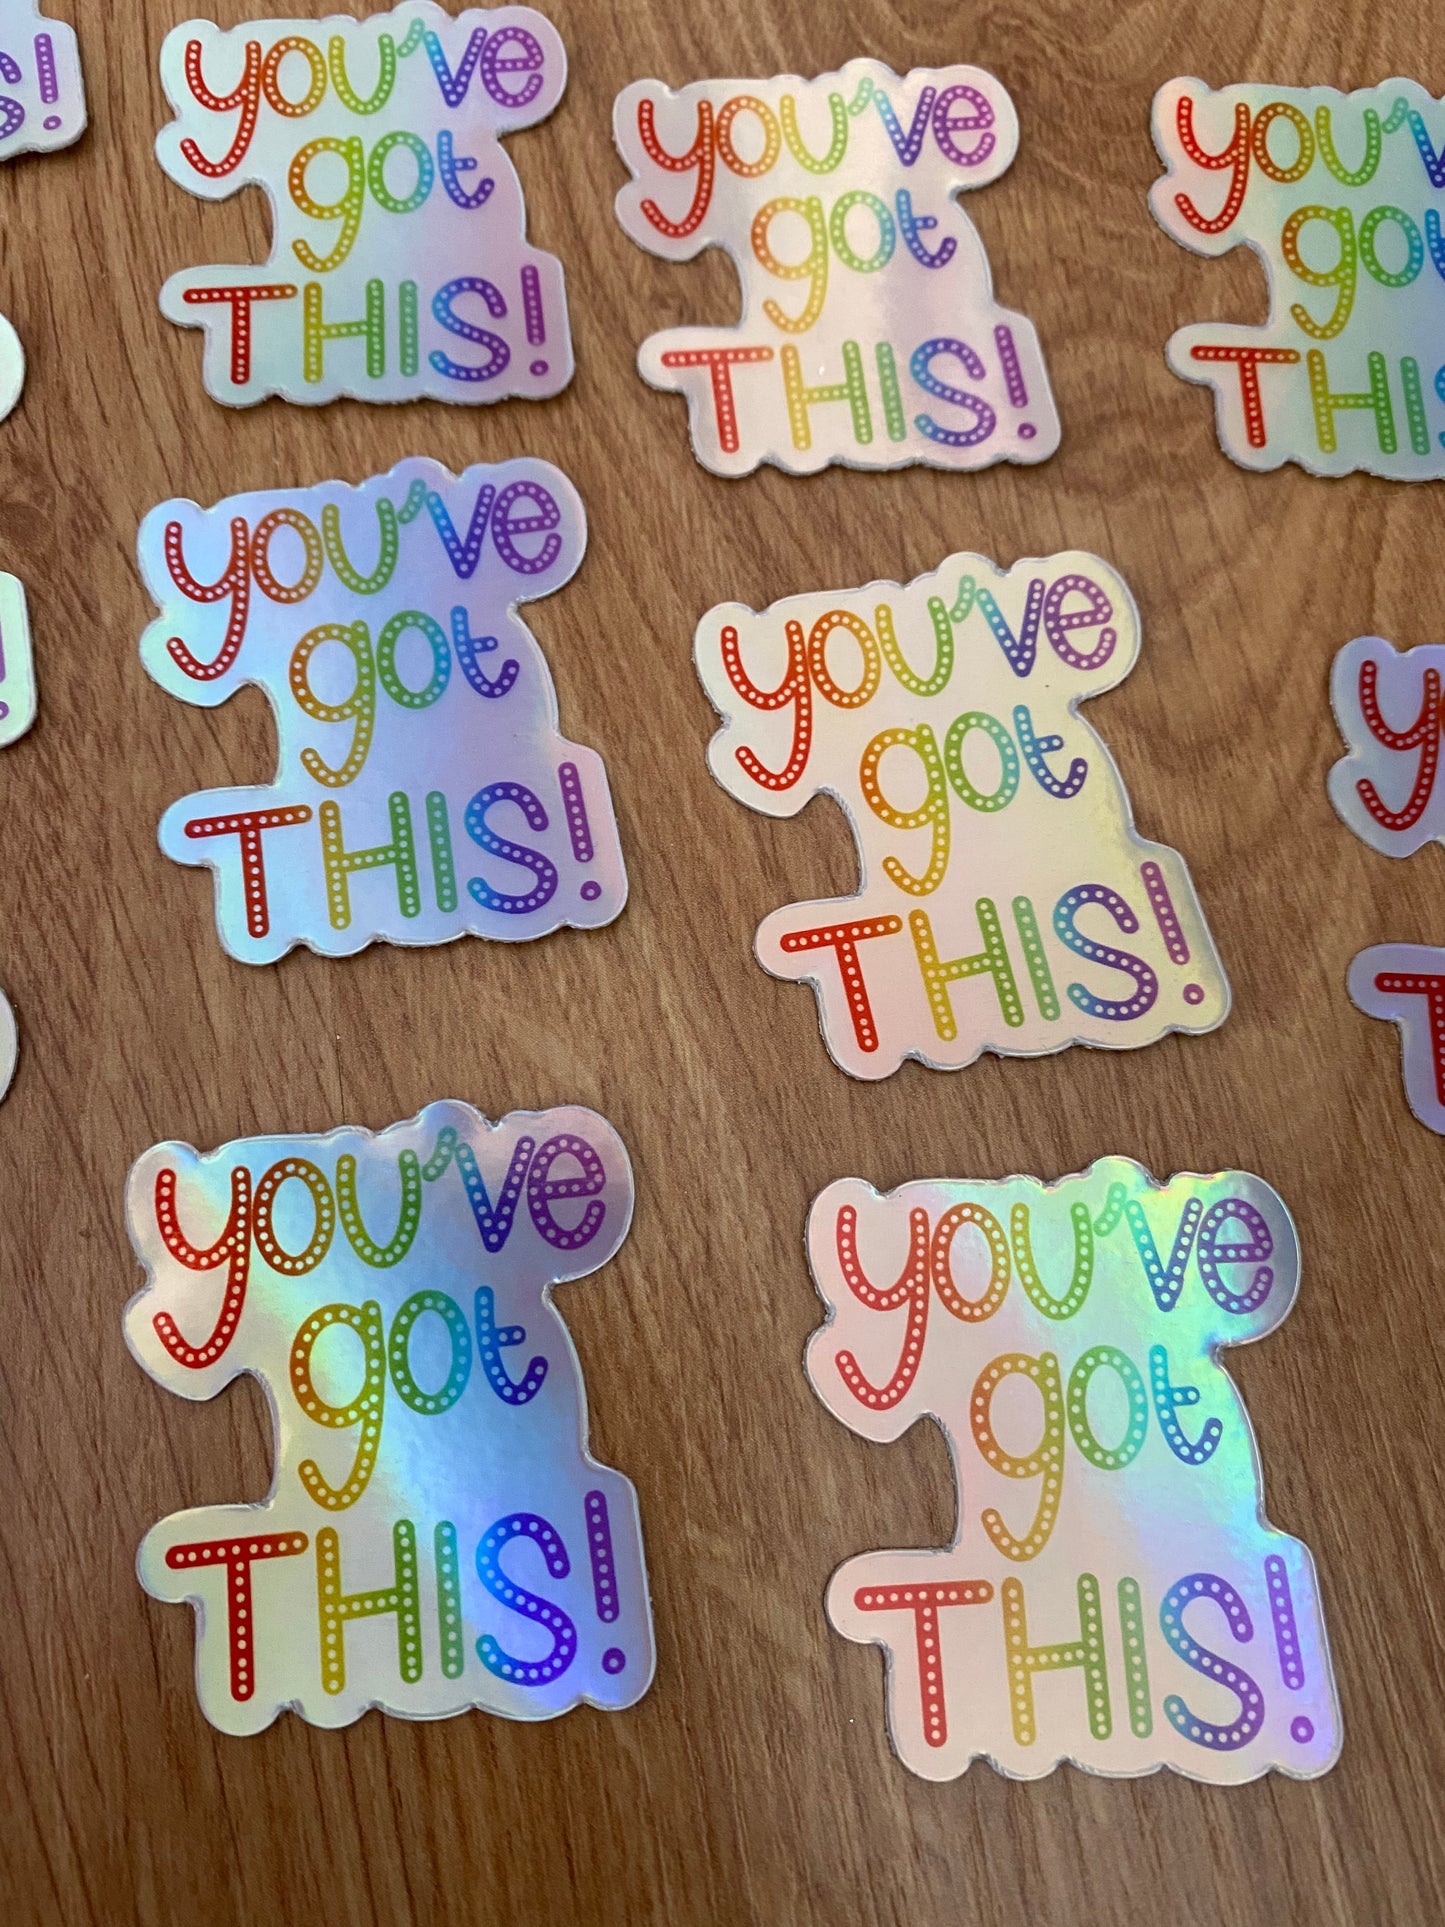 You’ve got this holographic sticker